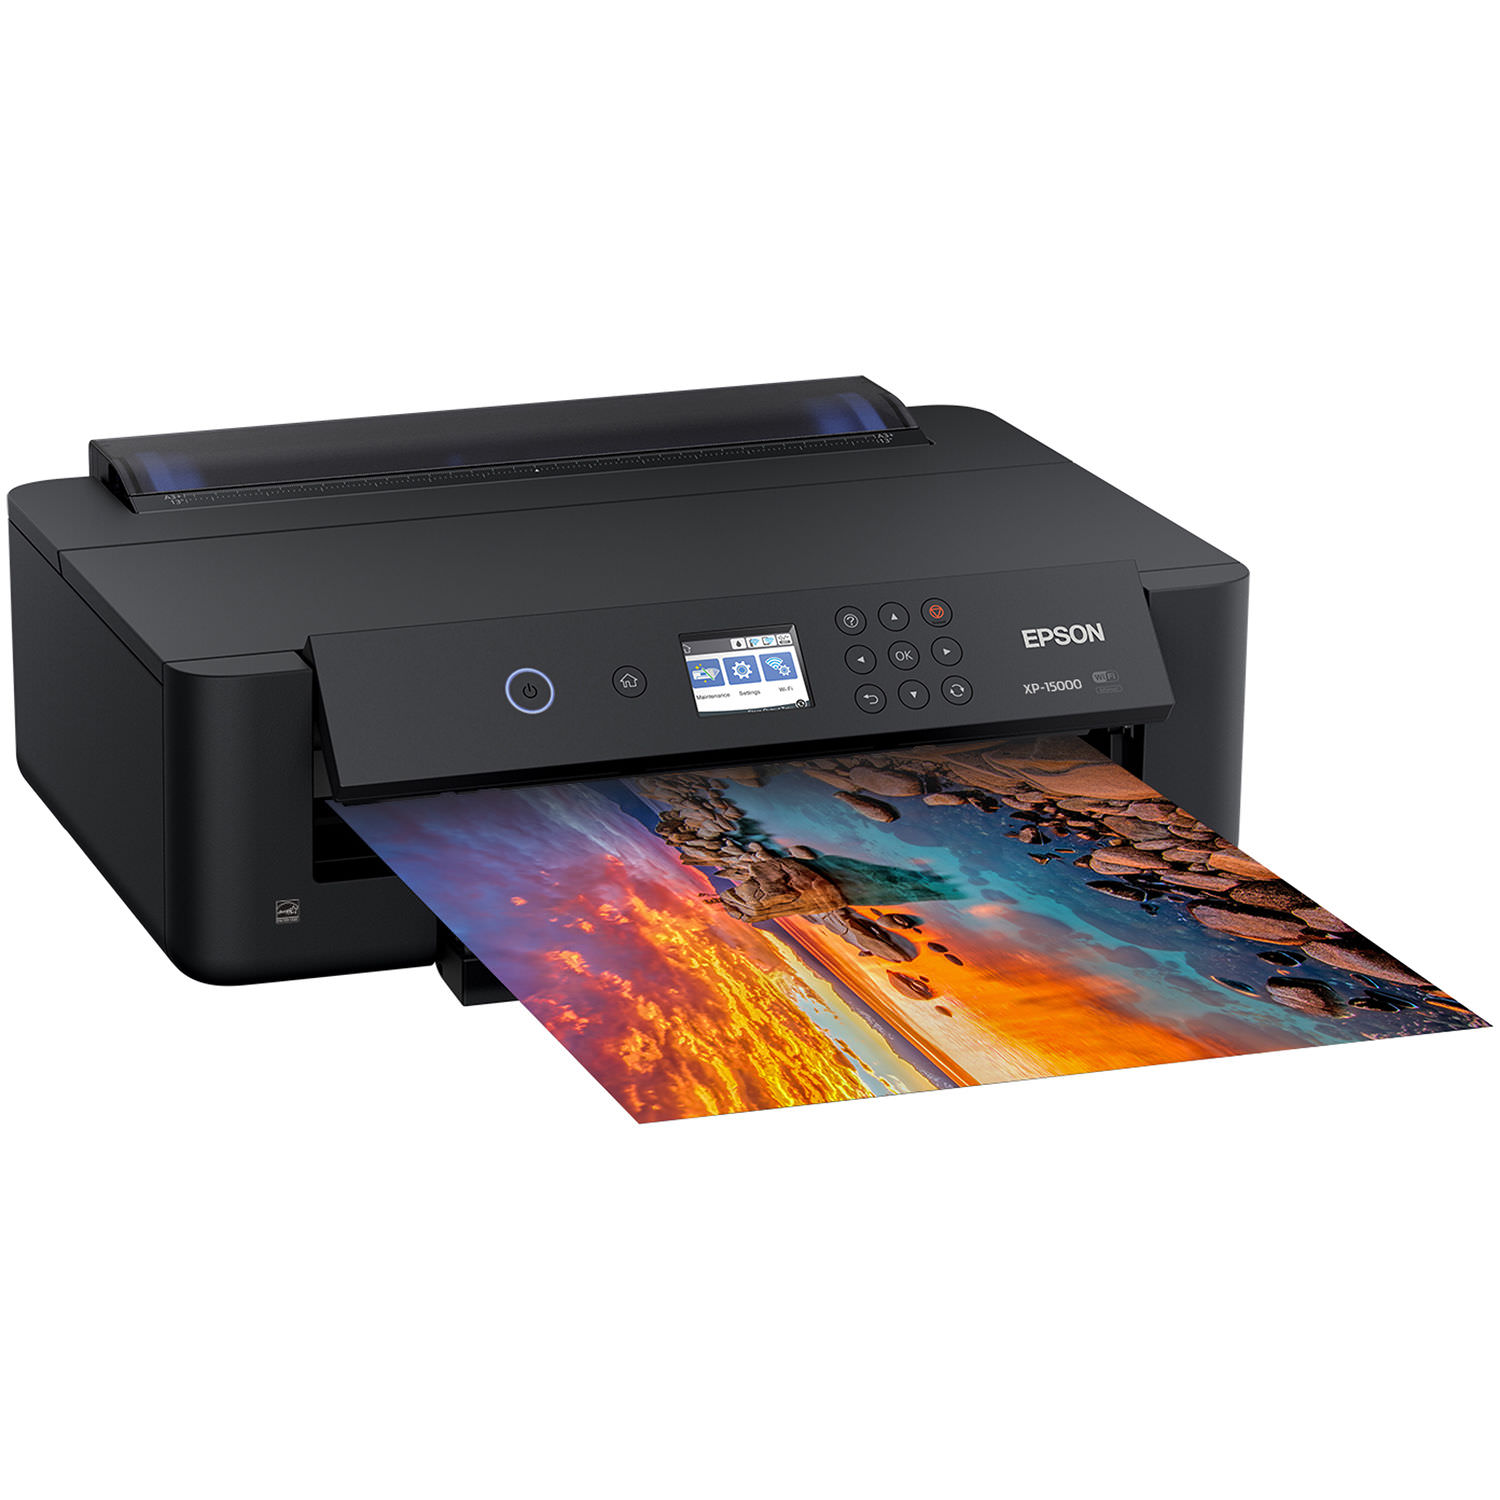 Epson Expression Photo HD XP-15000 Wide-format Printer - image 4 of 6